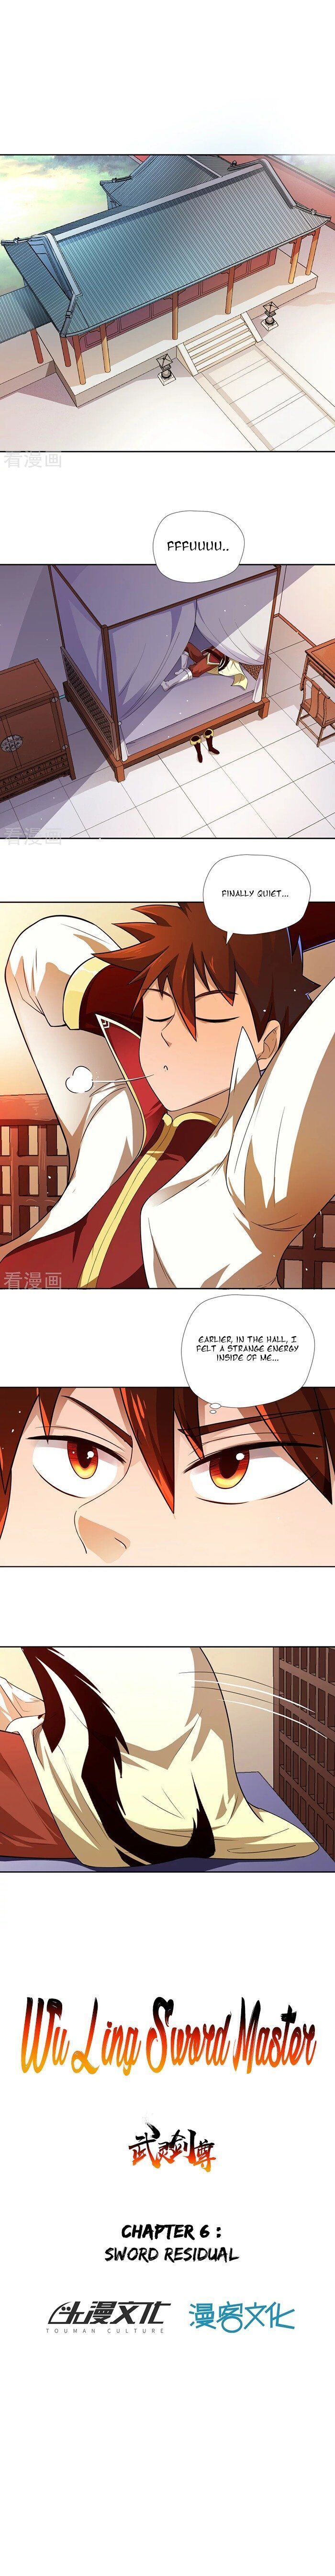 Wu Ling Sword Master Chapter 6 page 1